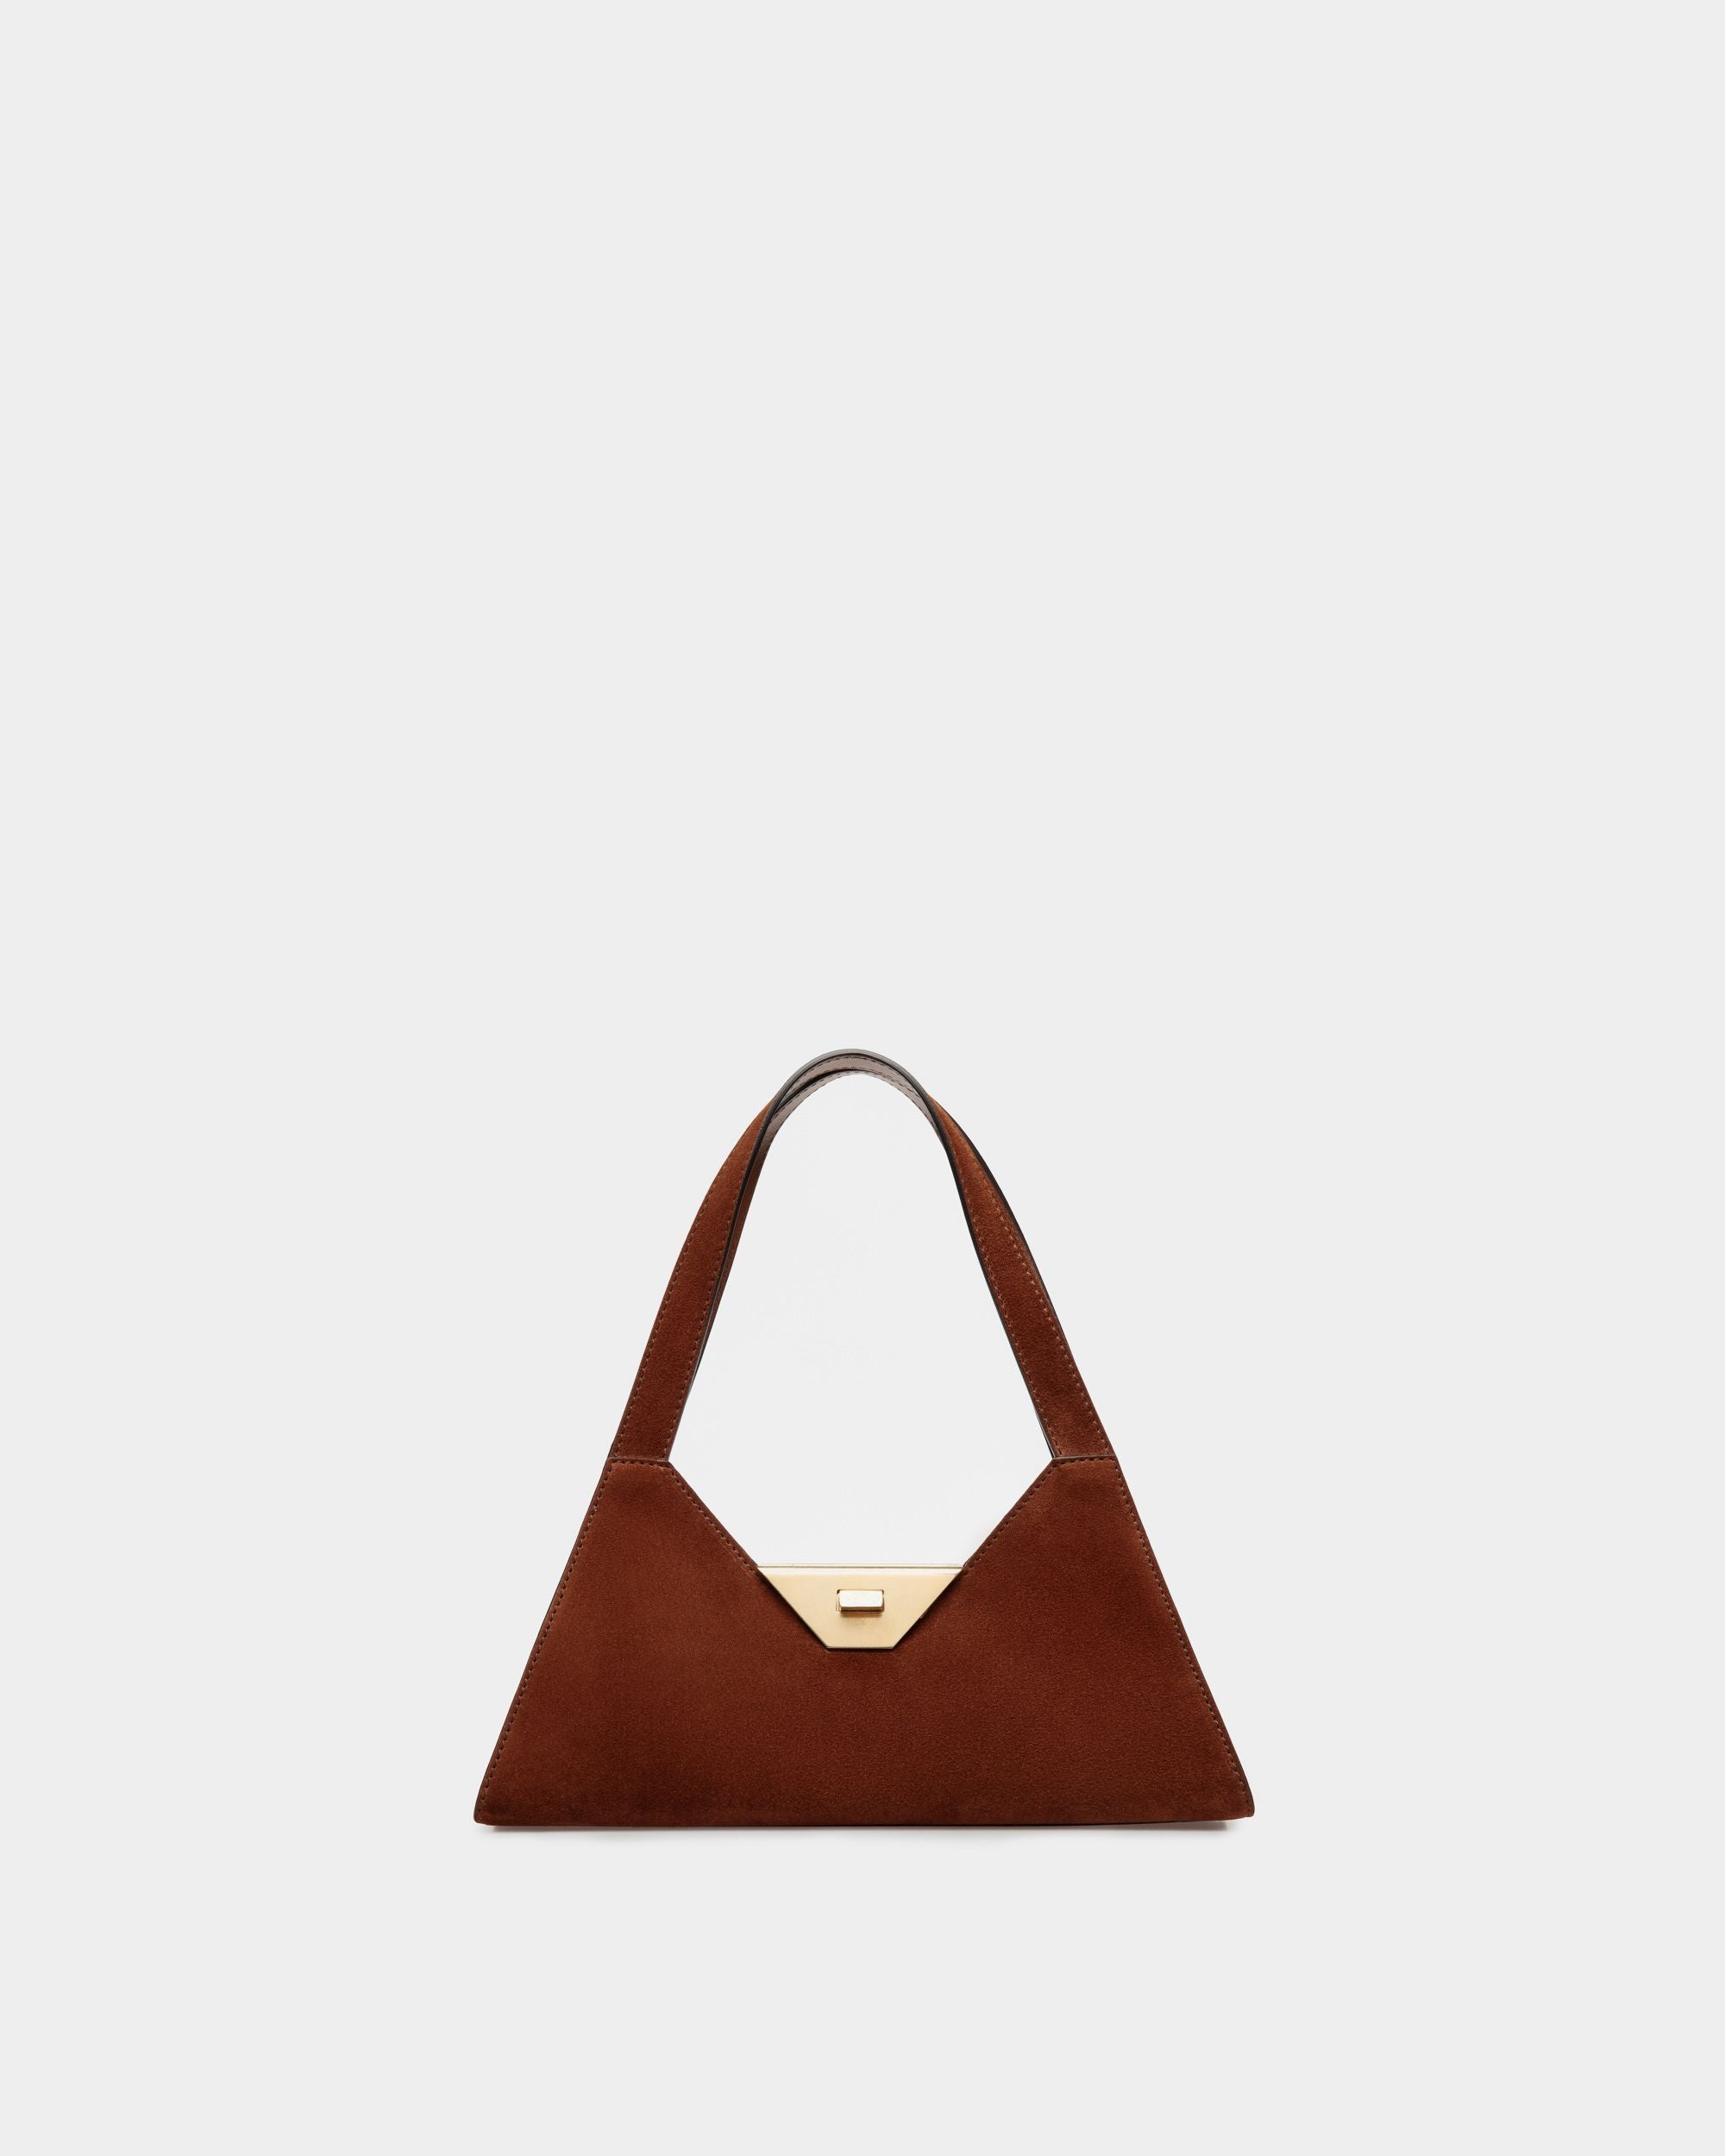 Women's Trilliant Small Shoulder Bag In Brown Suede Leather | Bally | Still Life Front